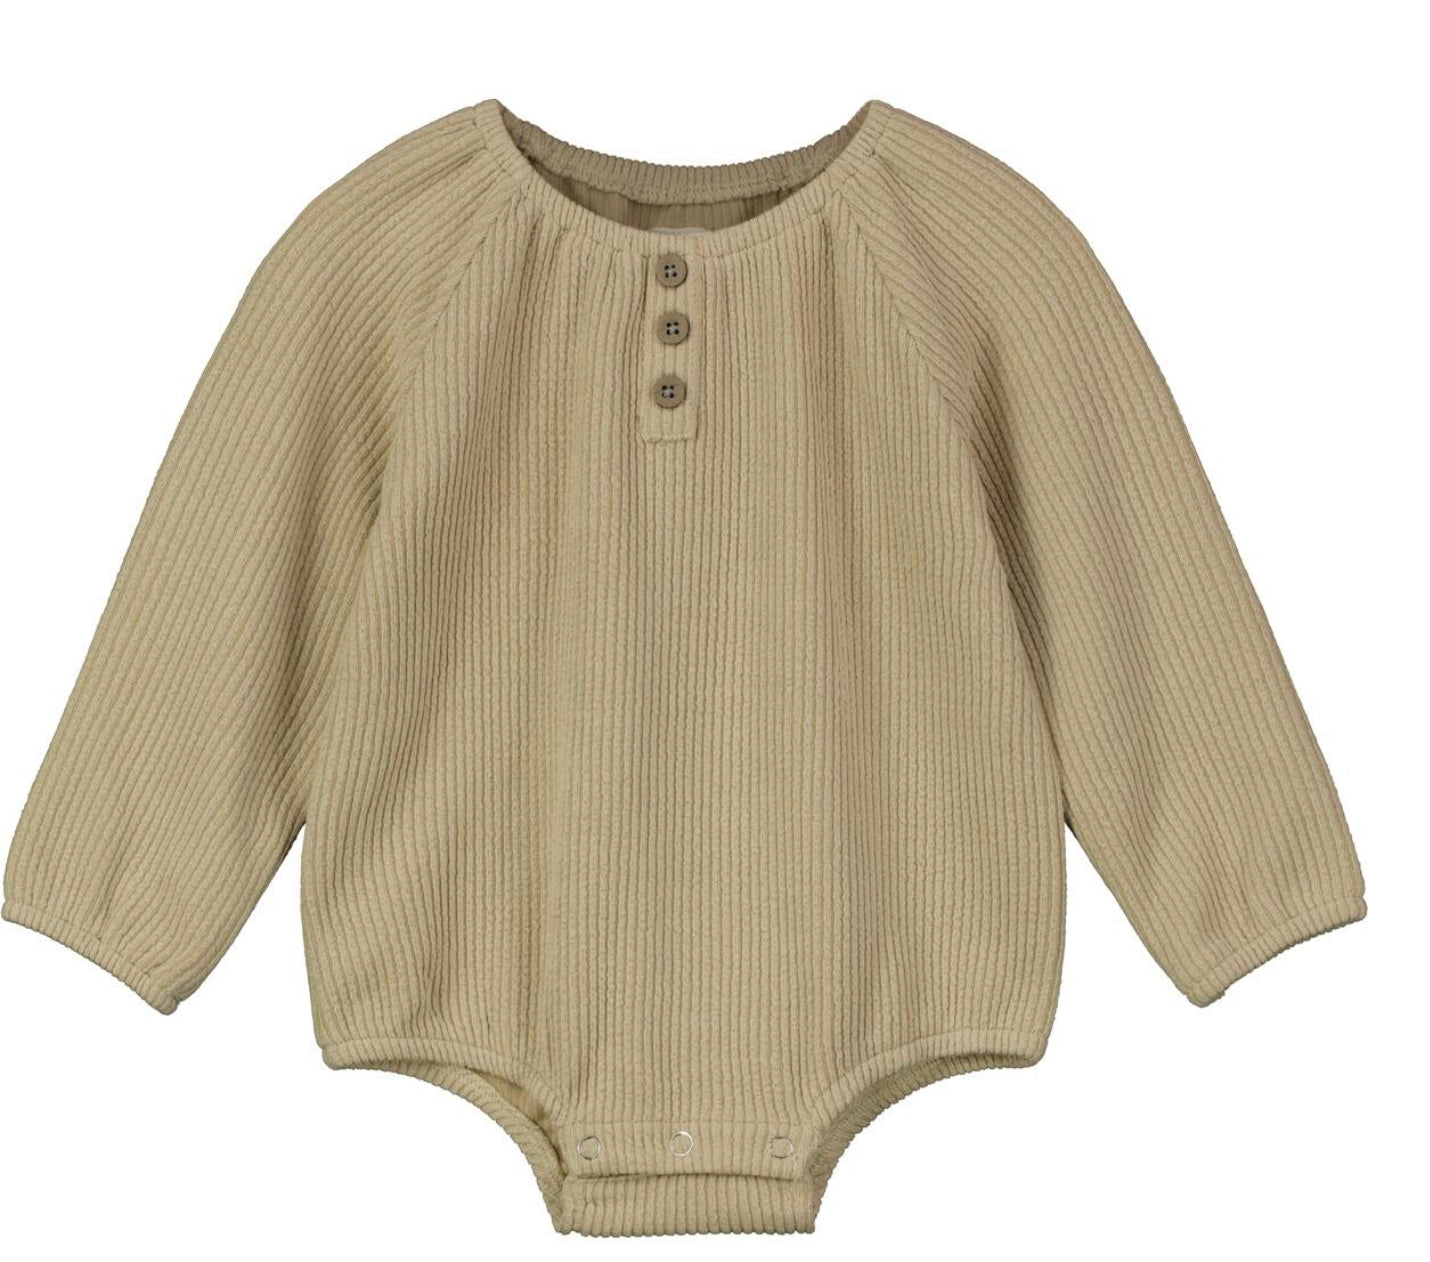 baby onsies, baby neutral, baby one piece outfits 